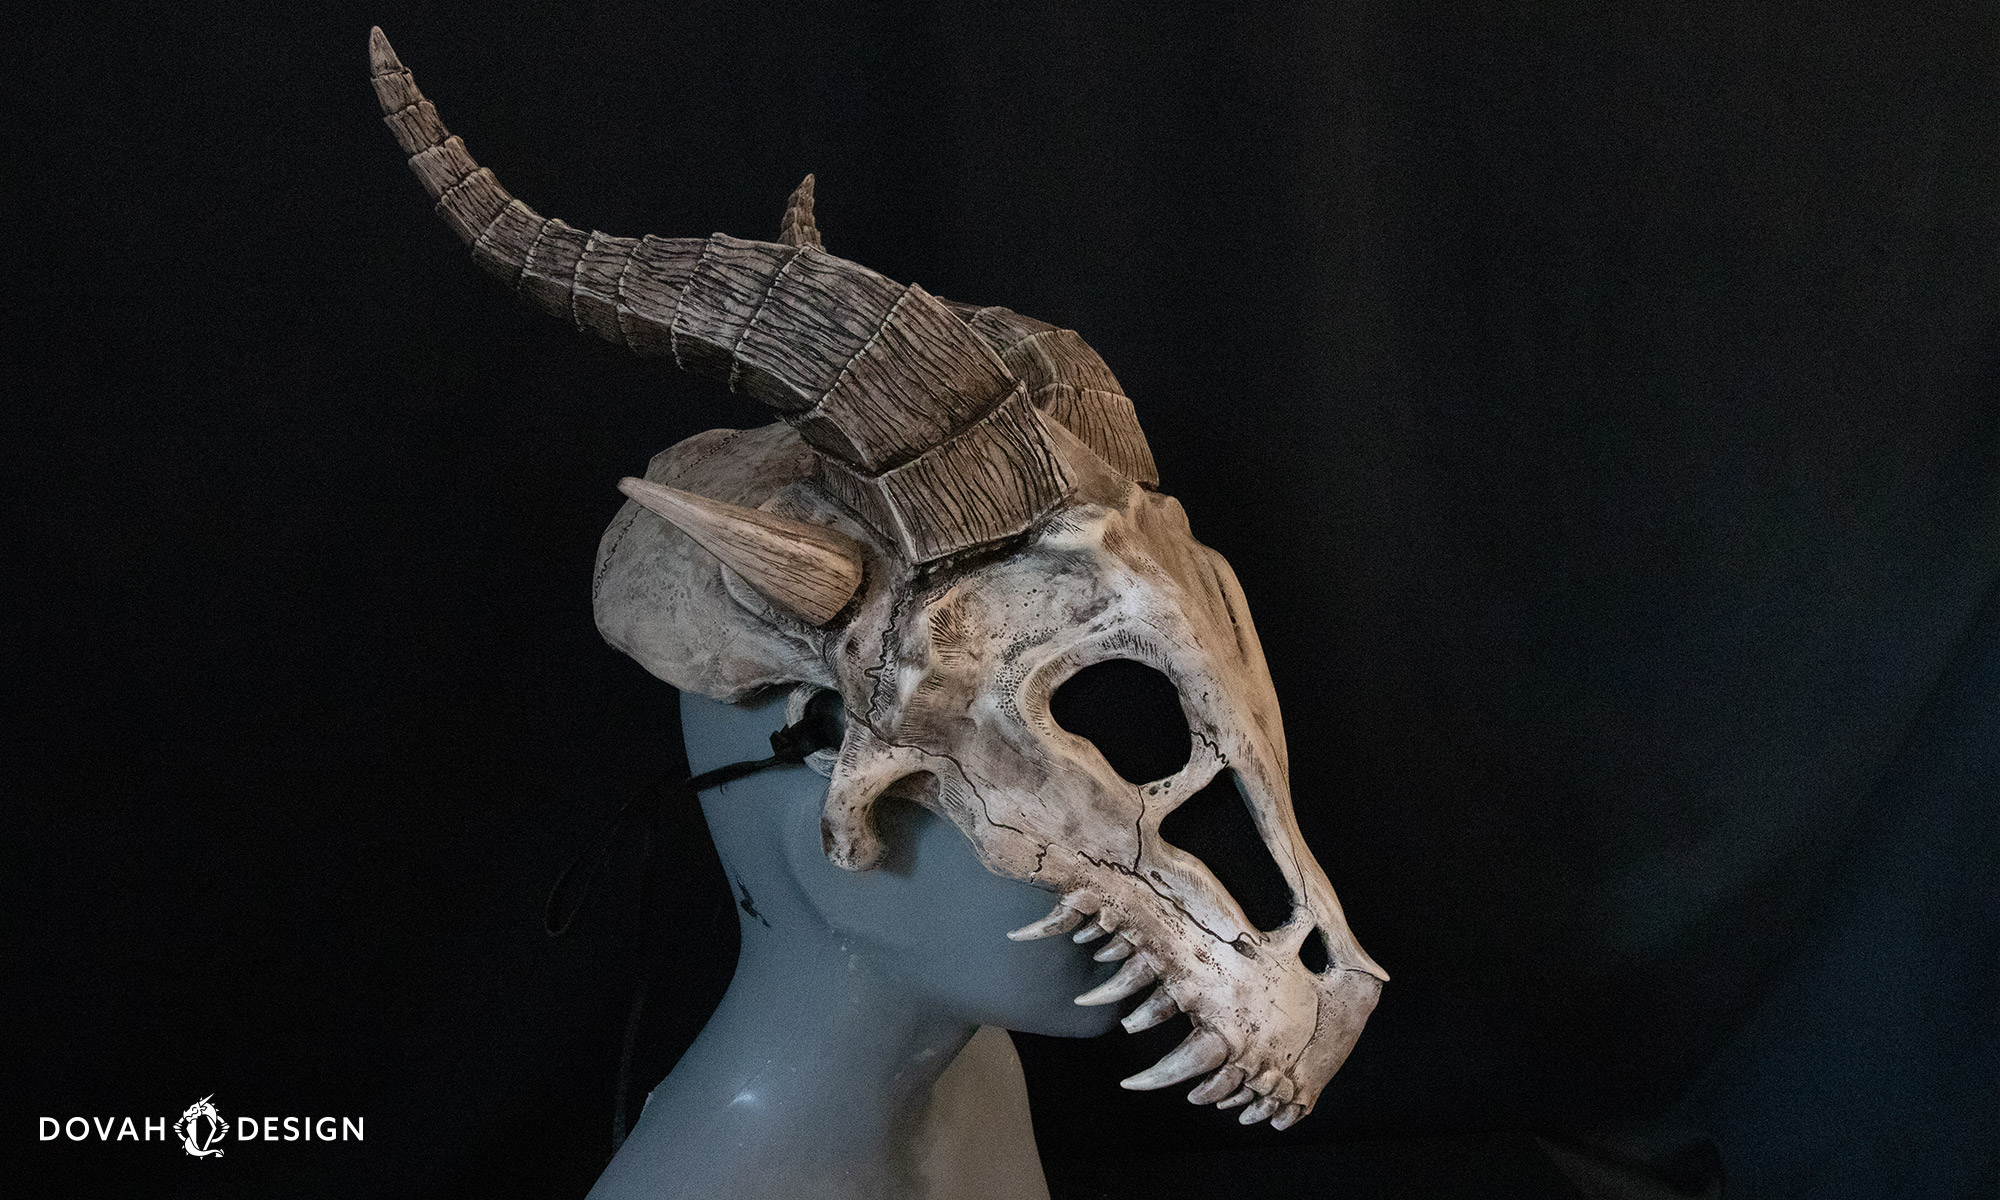 Wearable dragon skull helmet prop posed in profile on a gray mannequin in front of a black background.